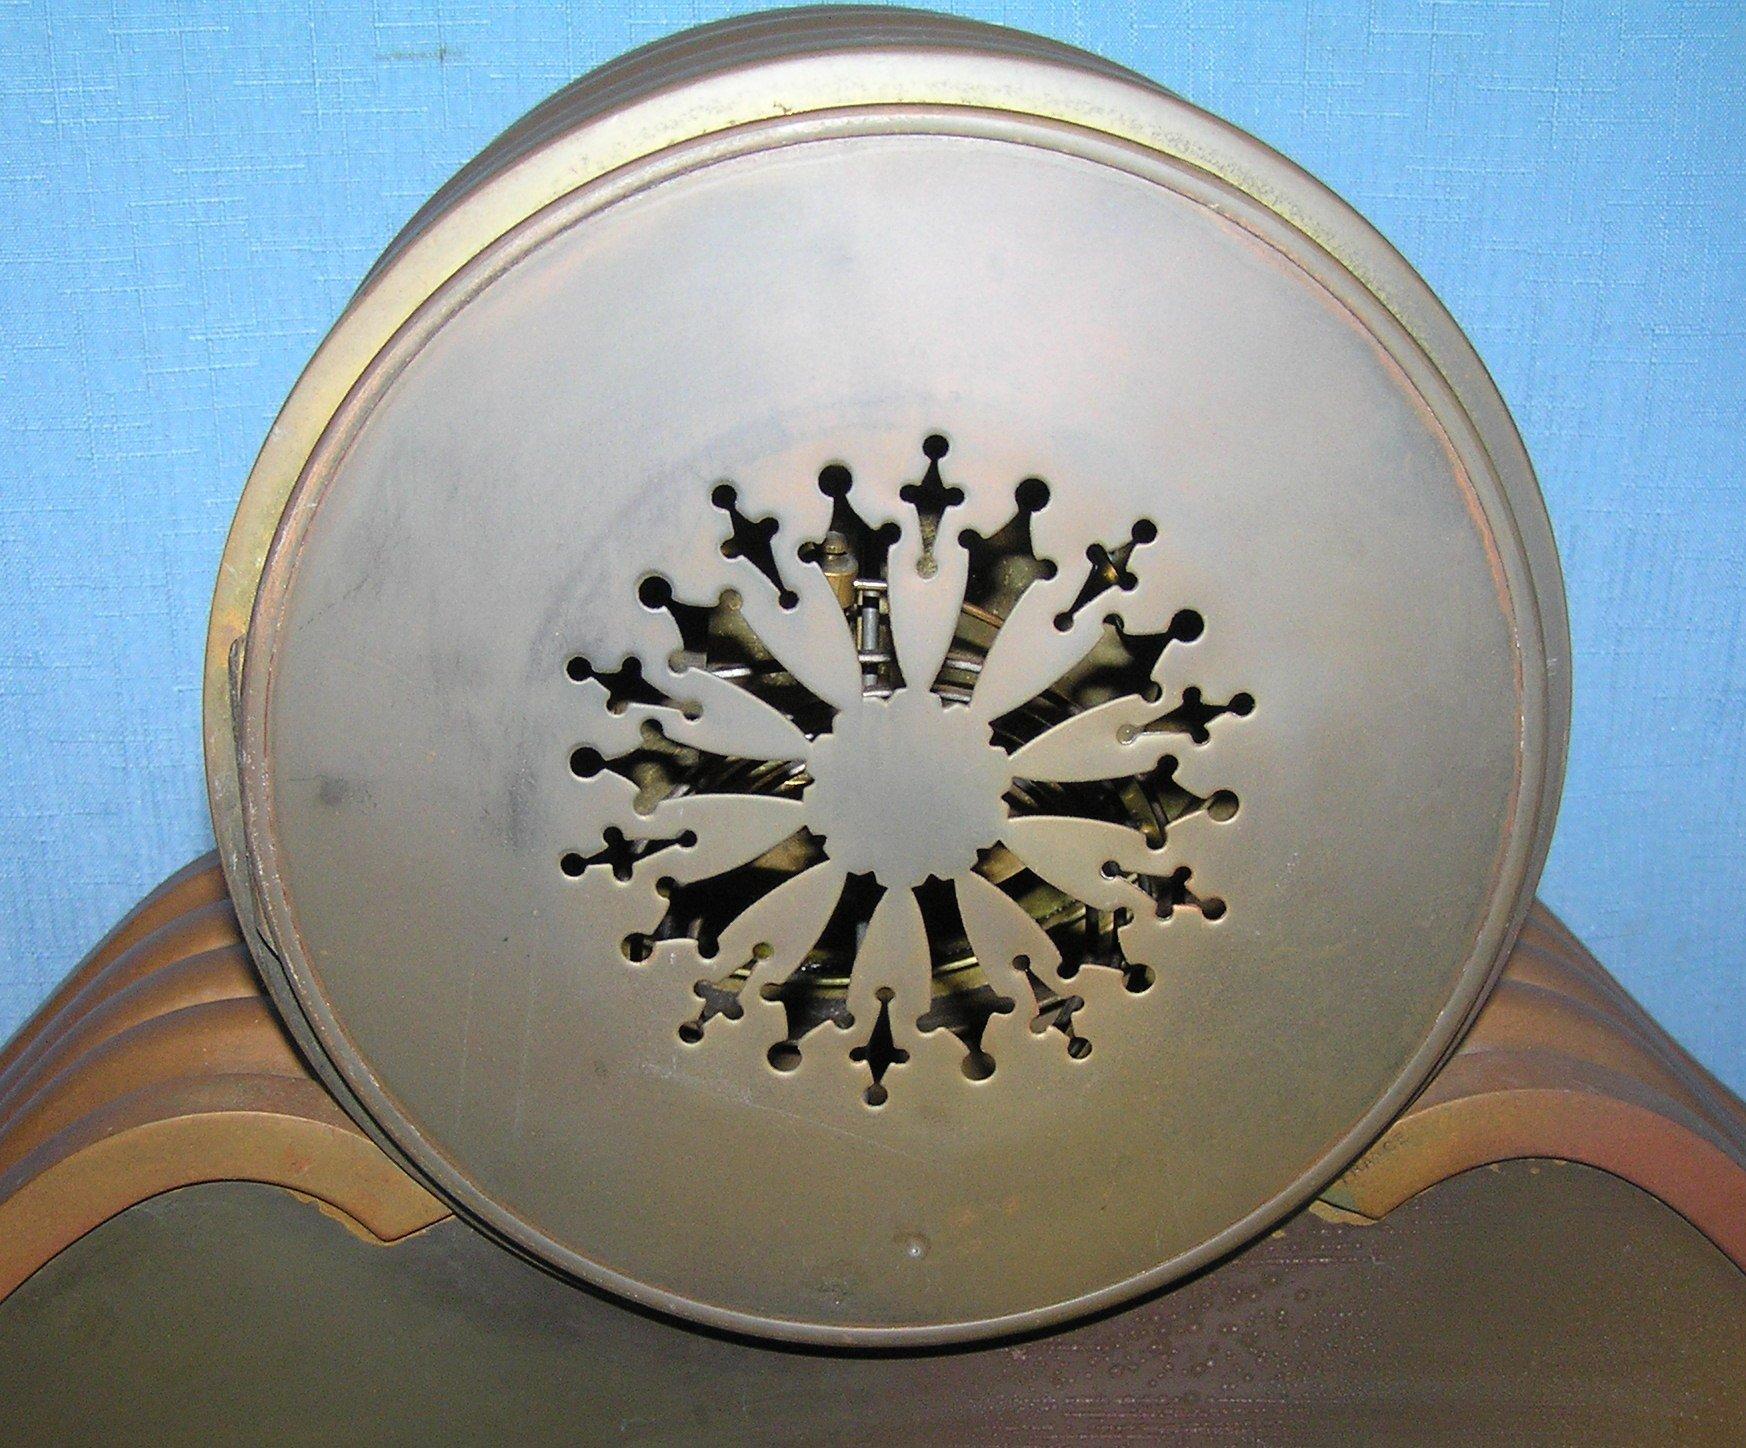 Great early Tiffany and Co. bronze mantle clock